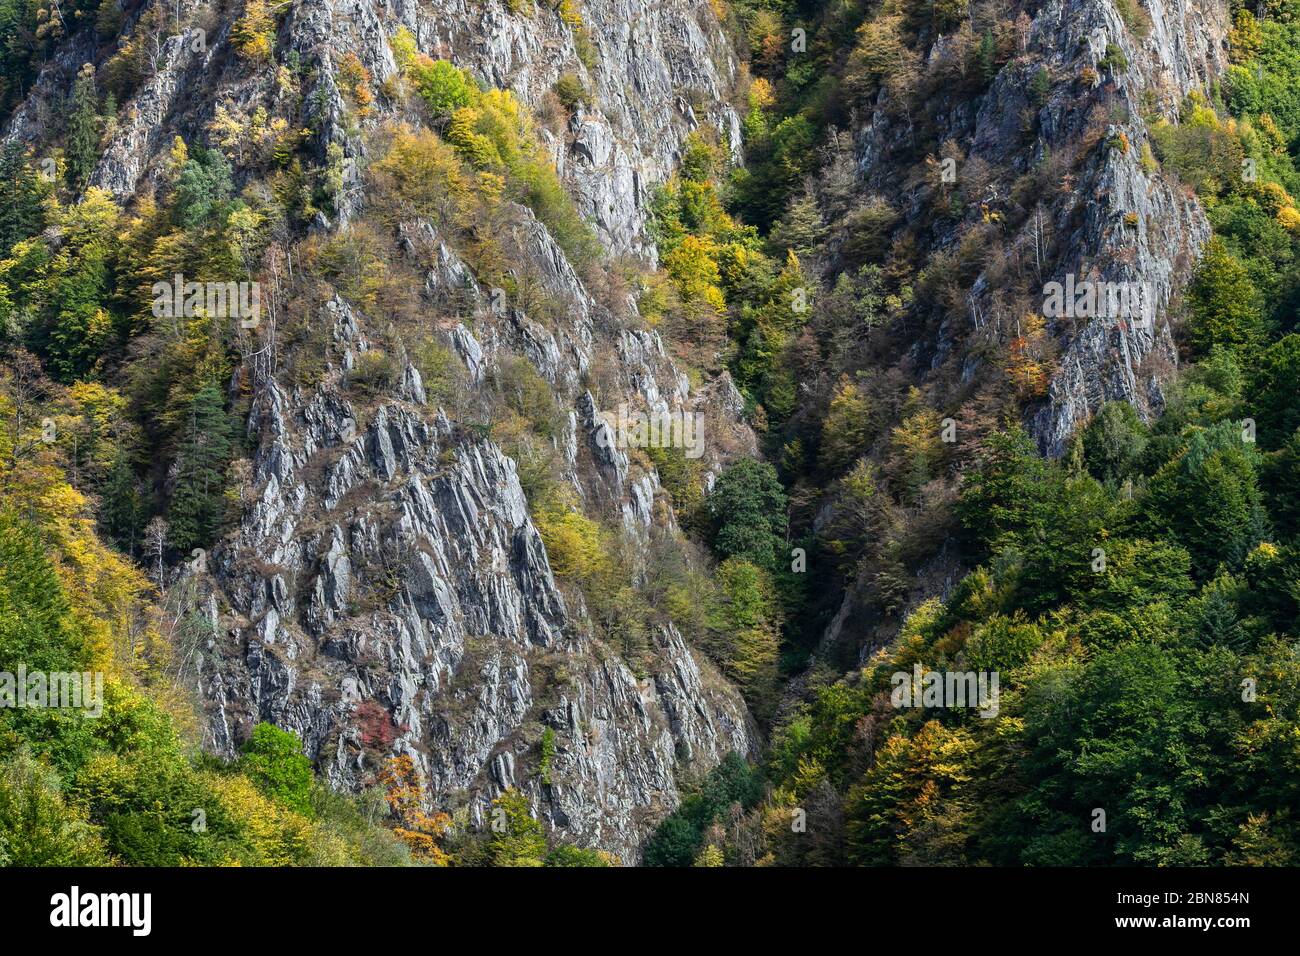 Rock cliff covered with autumn forest Stock Photo